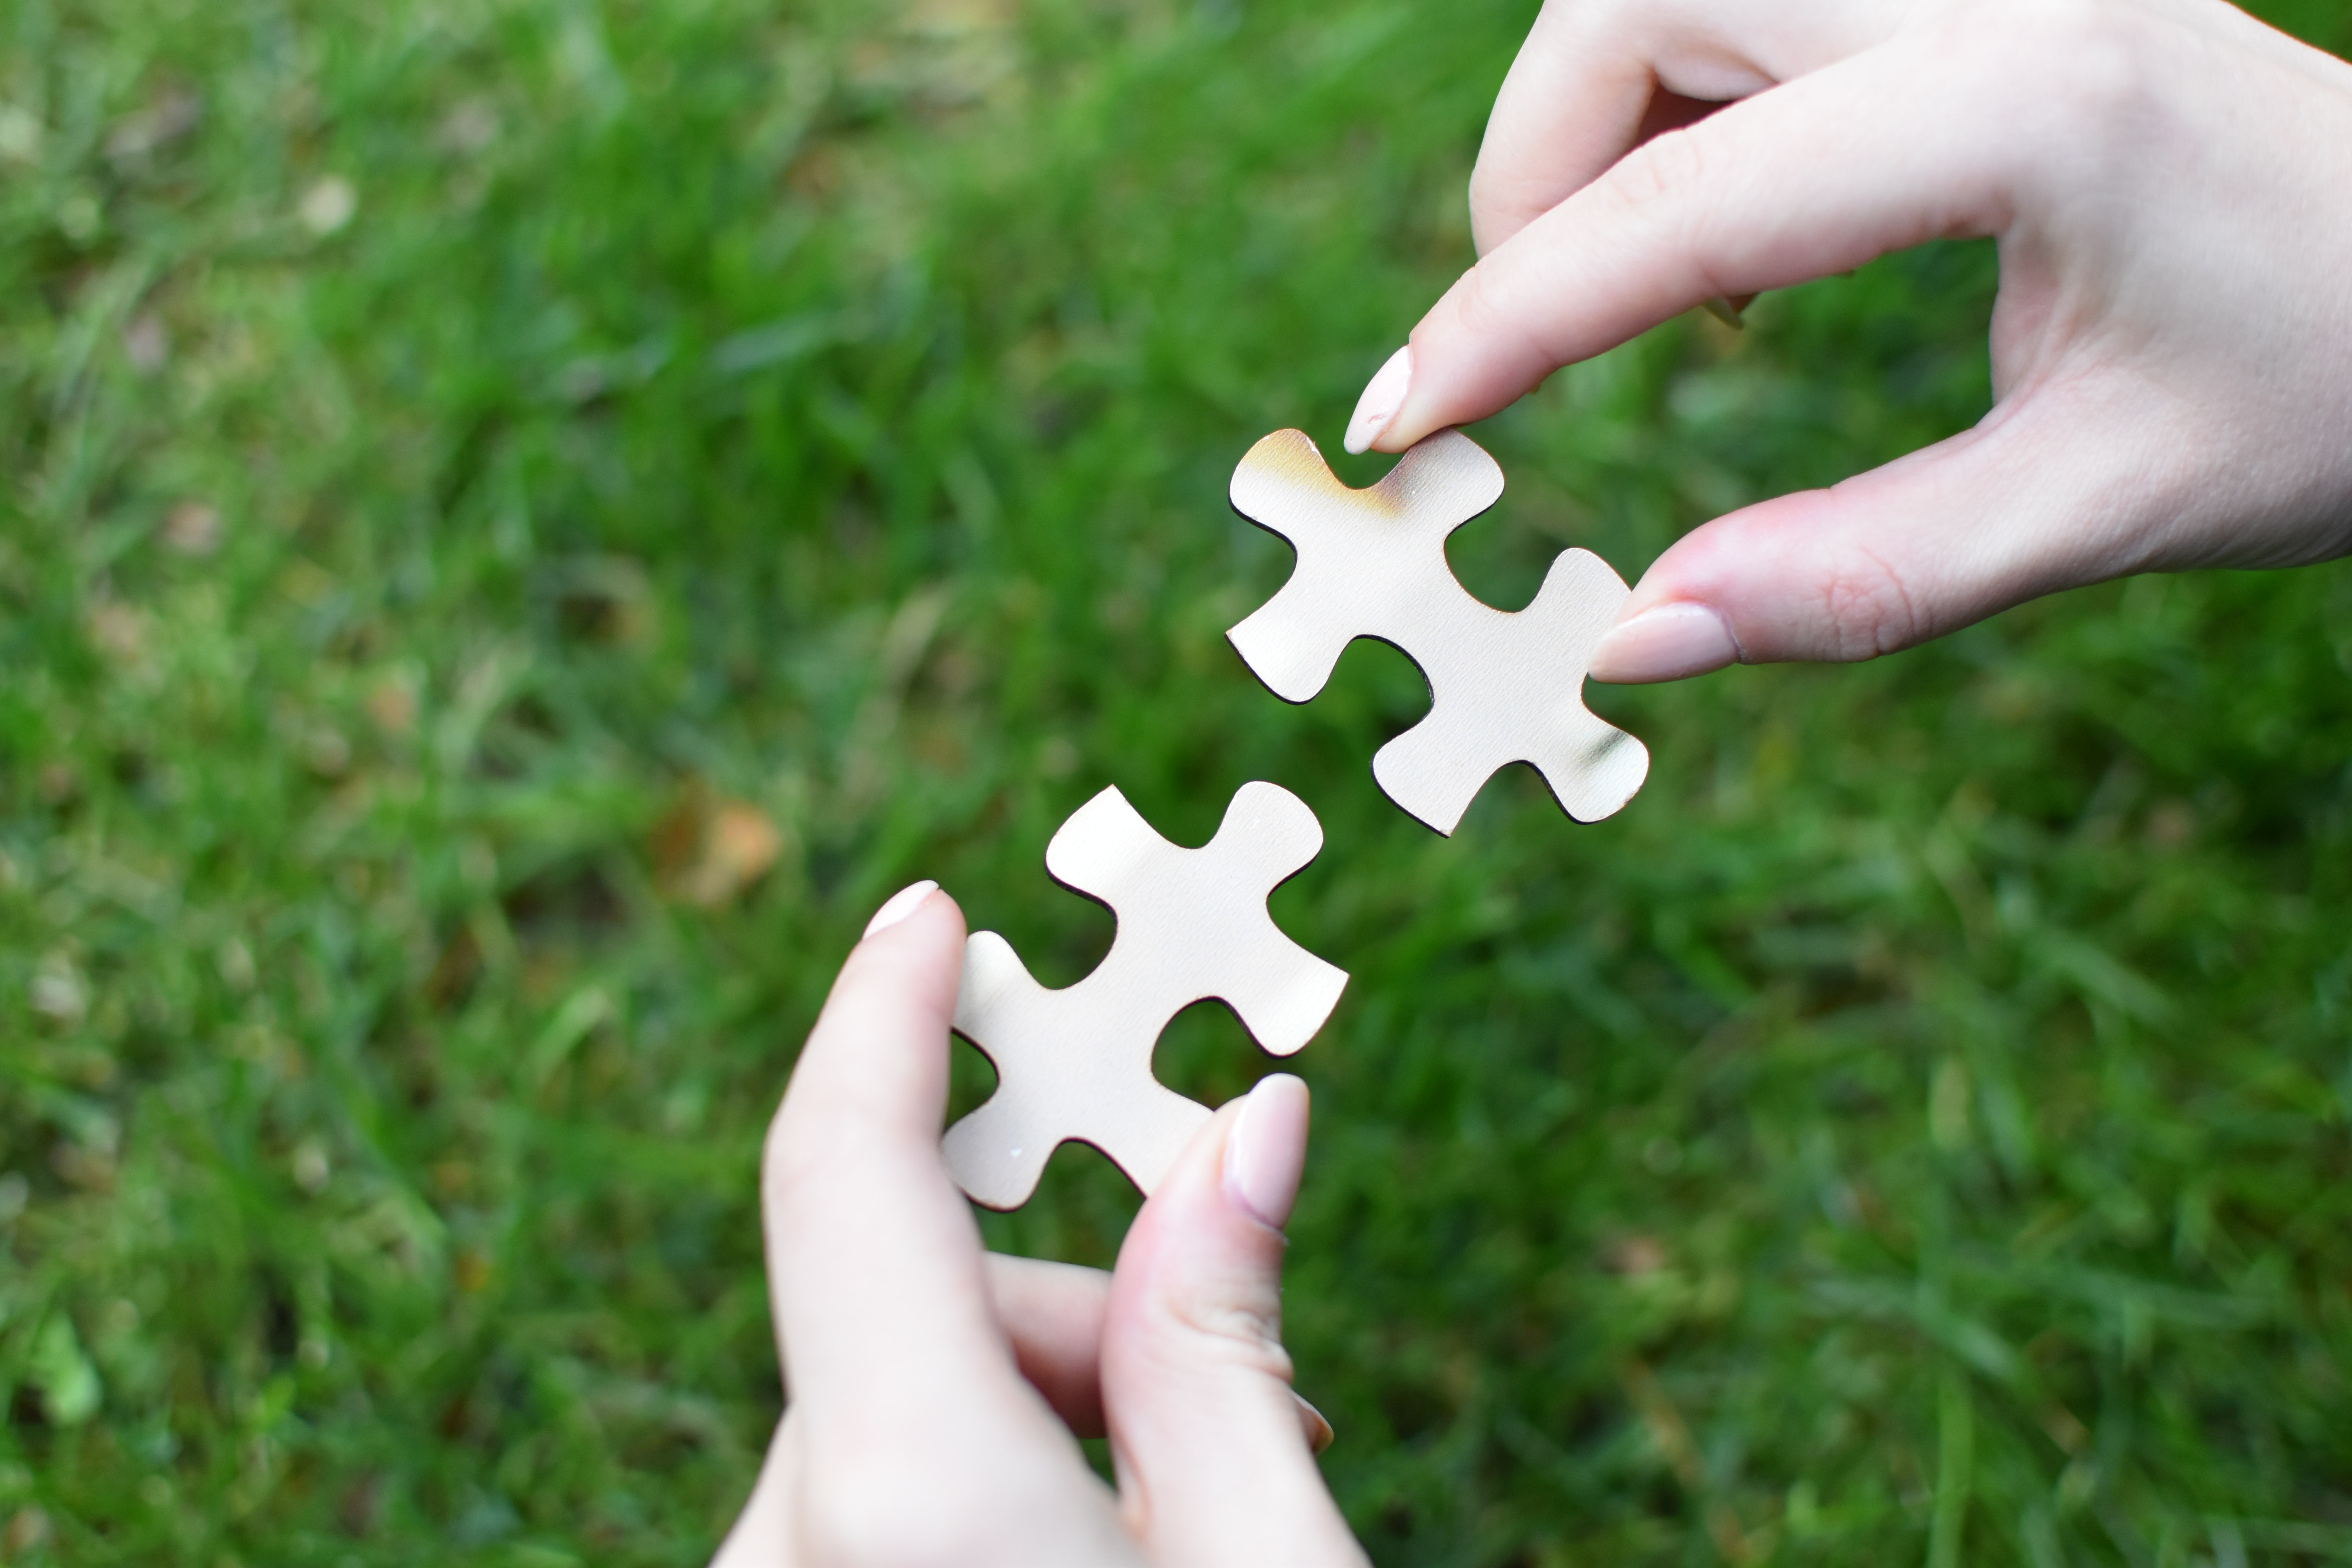 Photograph of two matching puzzle pieces being held over a patch of grass.